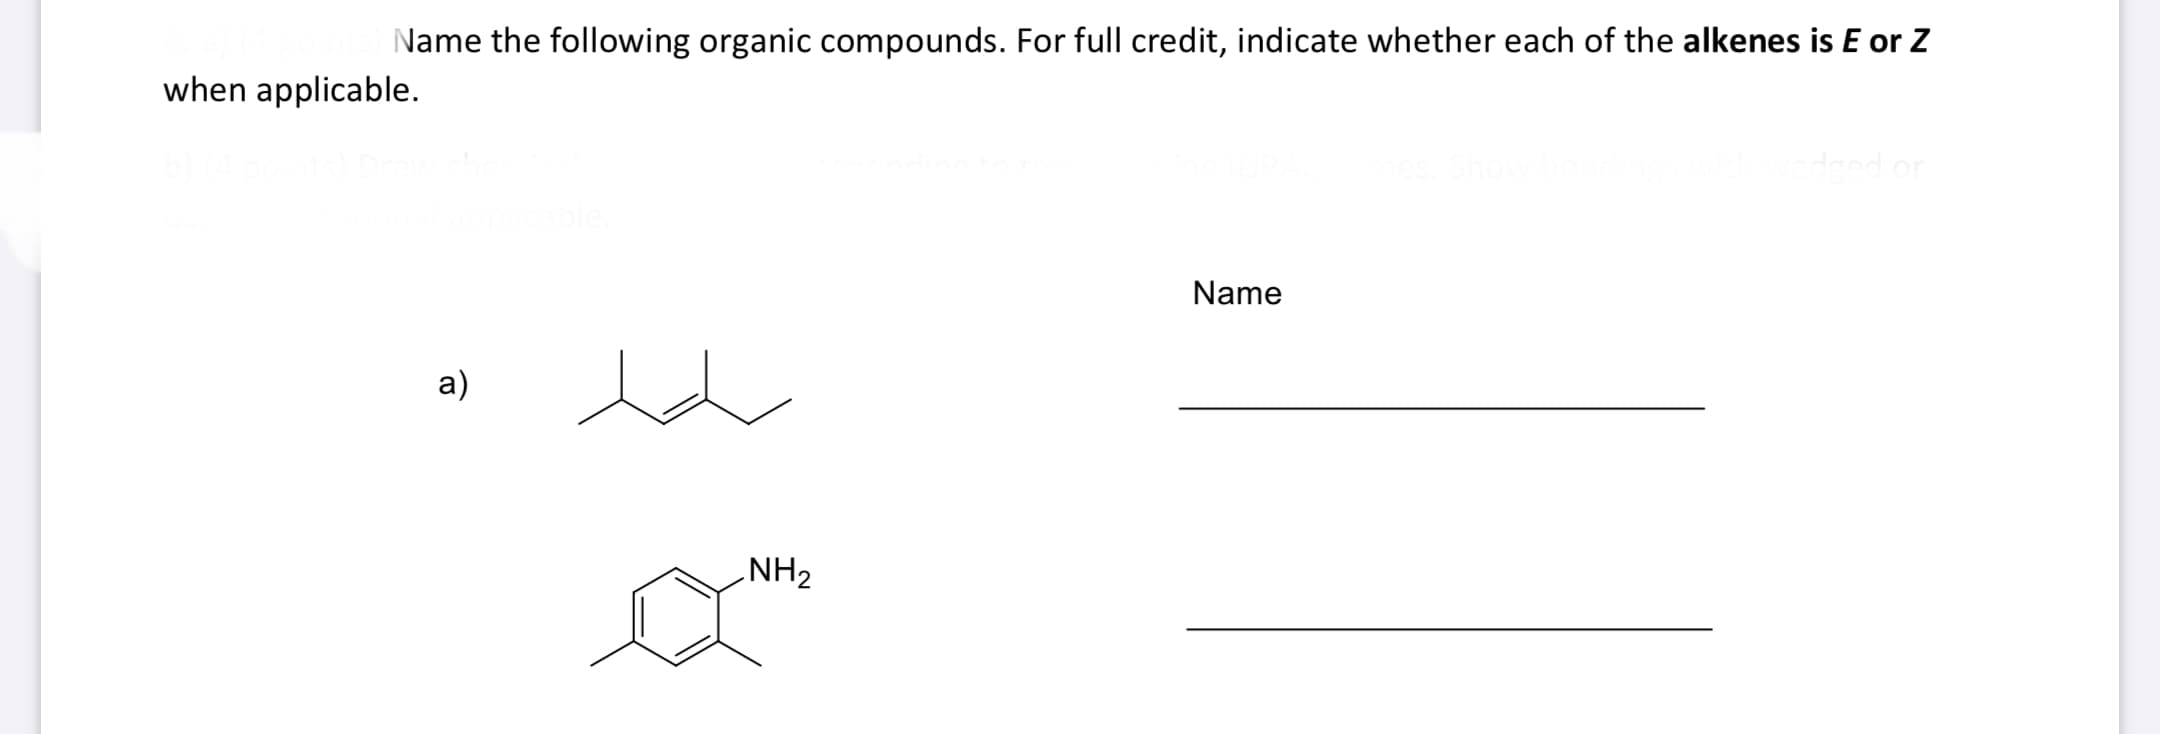 Name the following organic compounds. For full credit, indicate whether each of the alkenes is E or Z
when applicable.
Ired or
Name
a)
NH2
